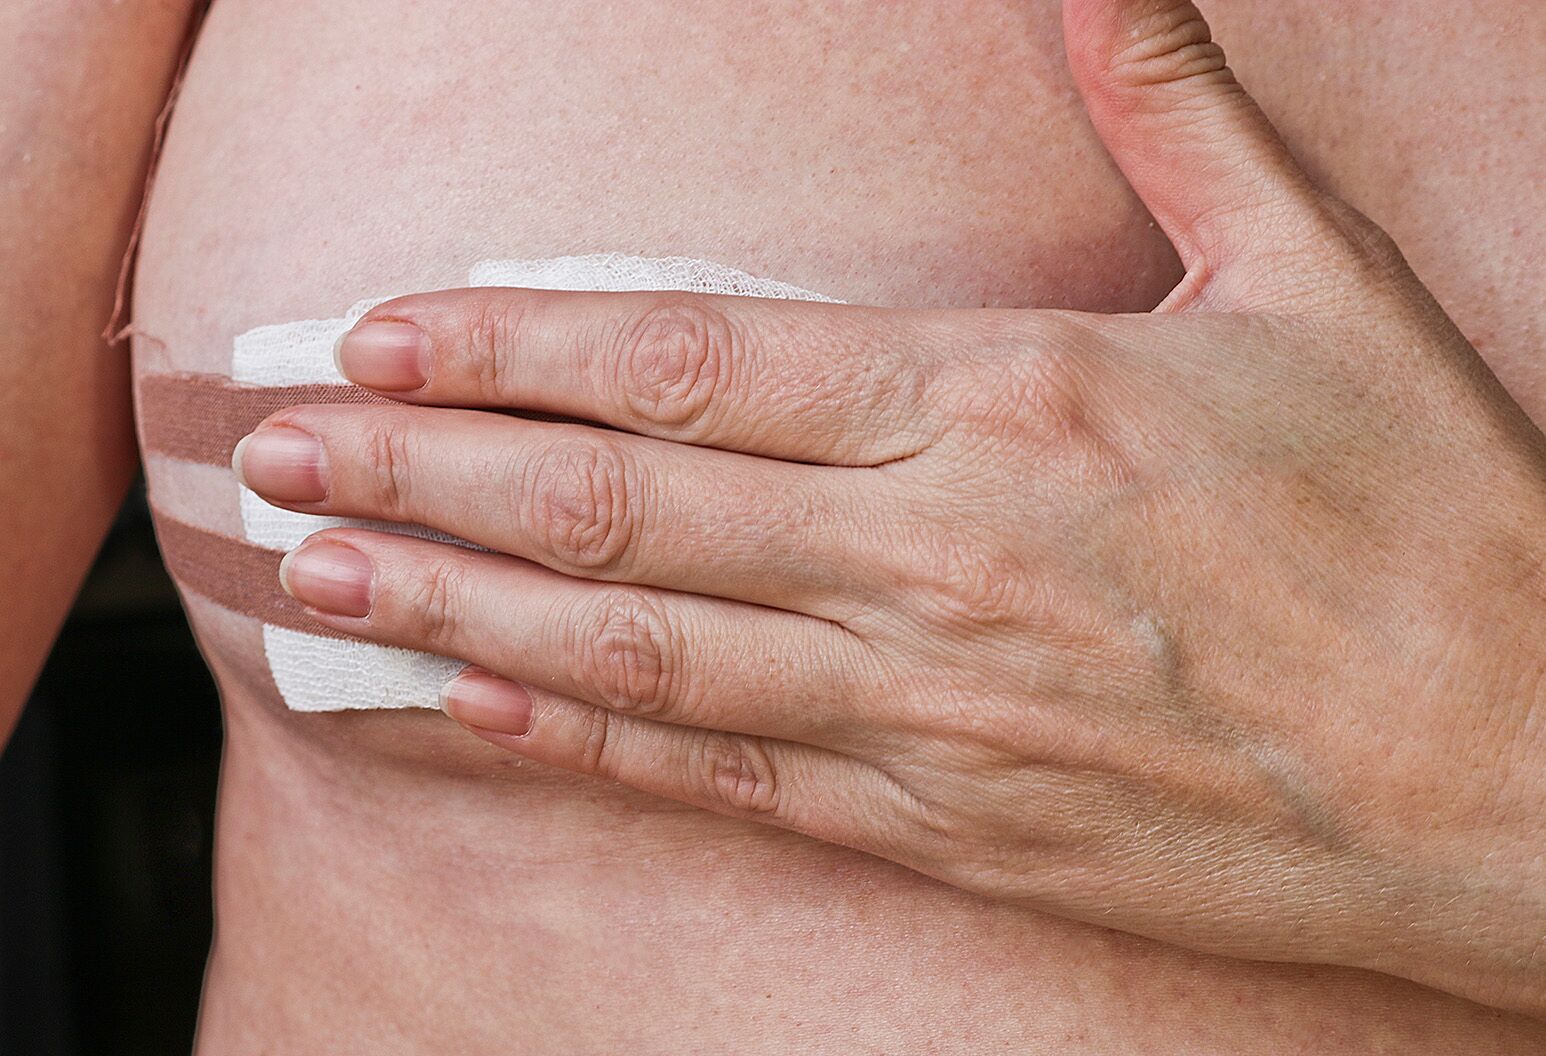 We understand the overwhelming fear of finding a breast lump